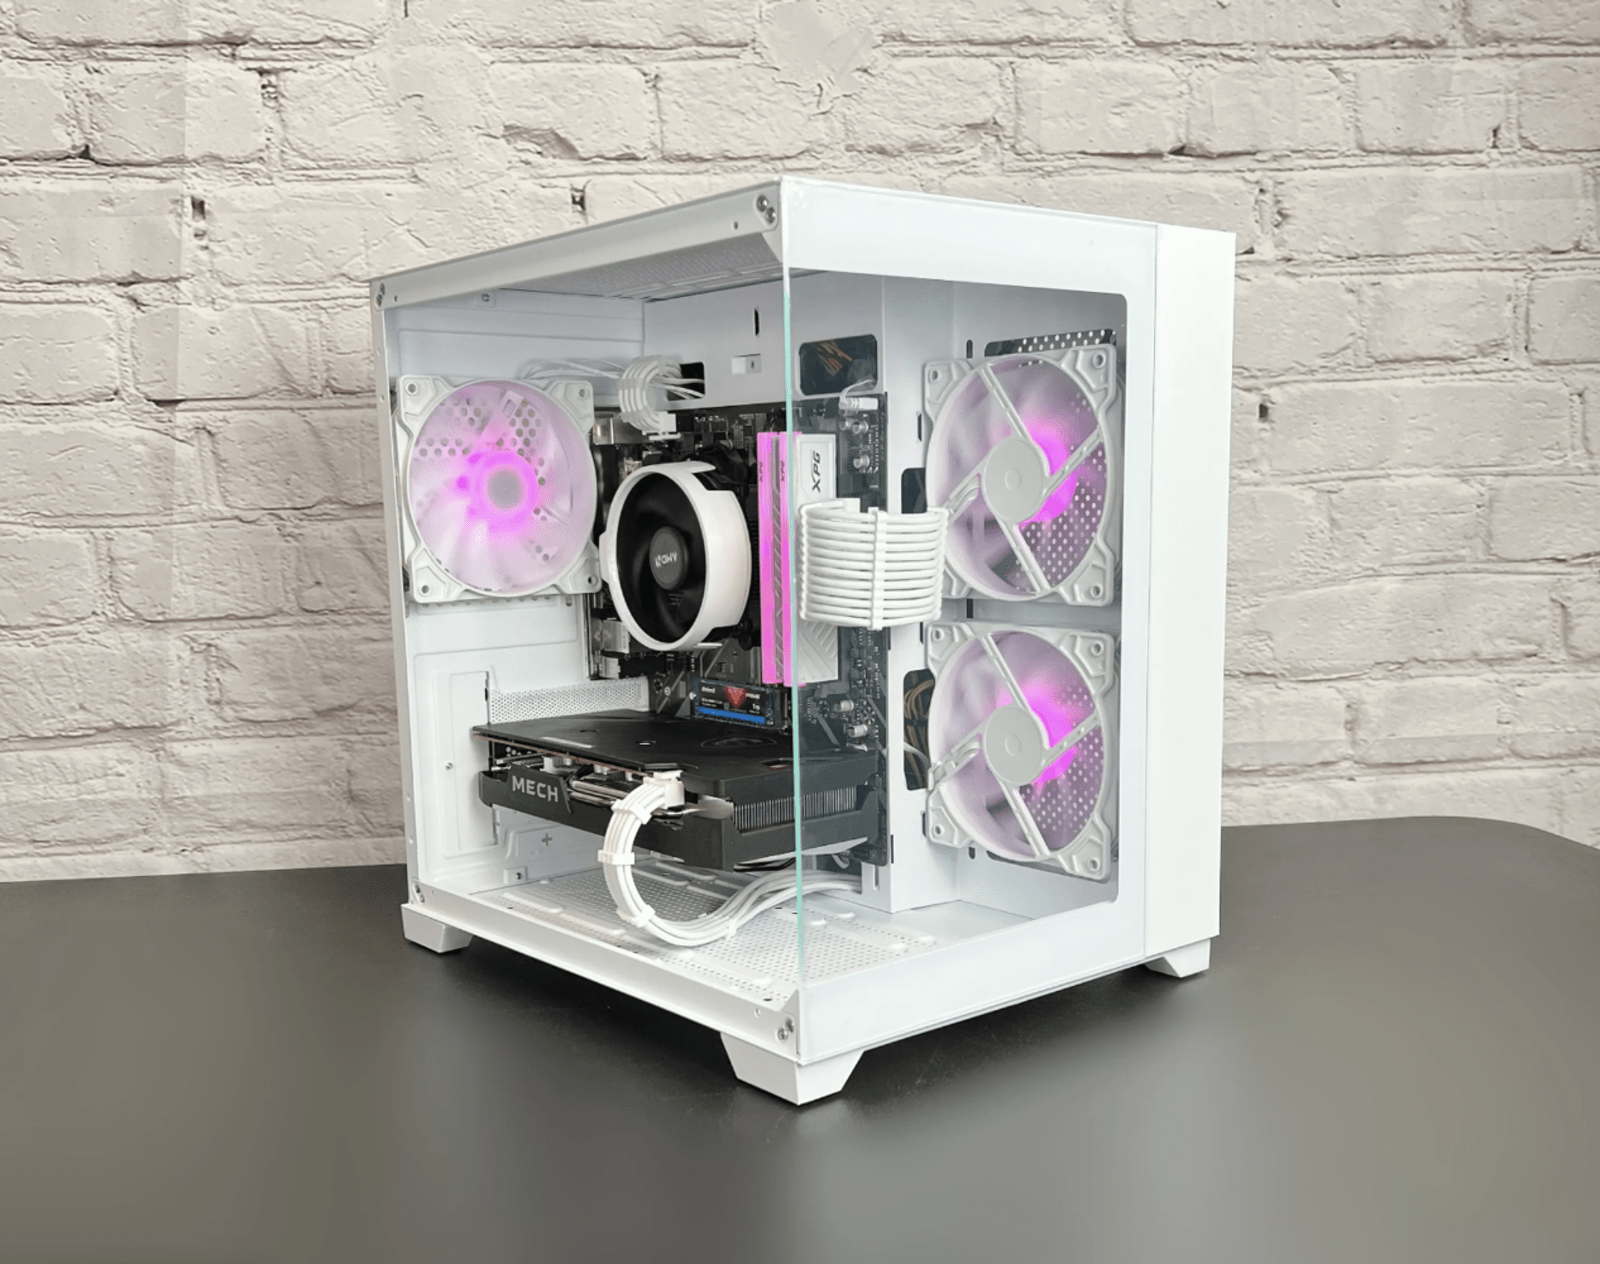 Shopping for an Affordable Prebuilt? Check This Out